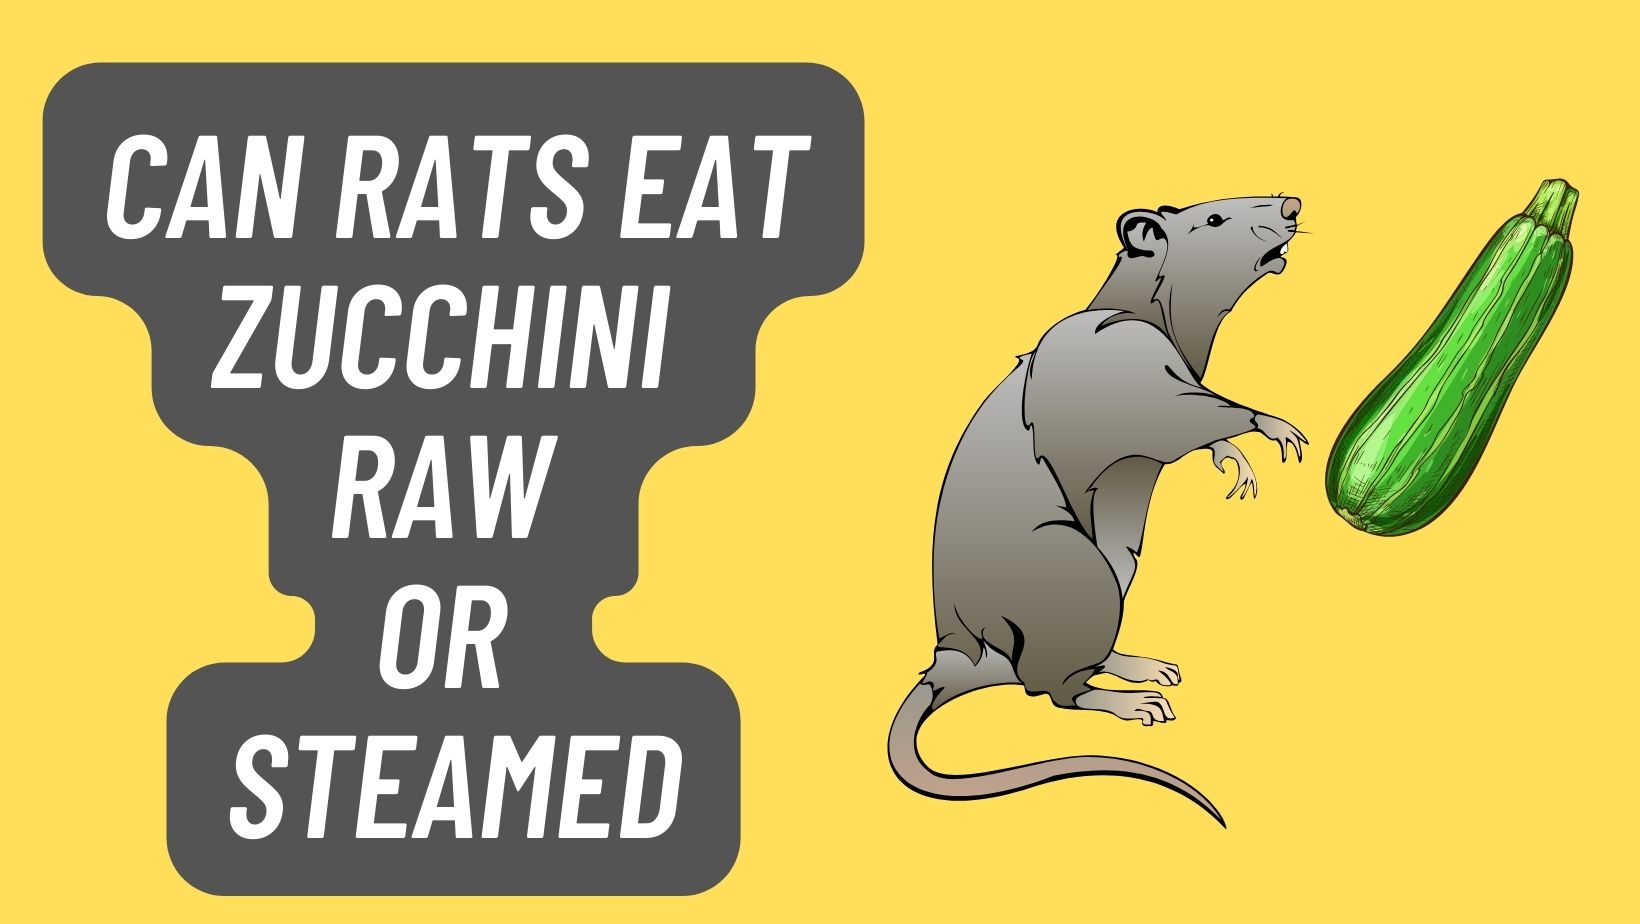 Can Rats eat Zucchini [Raw or Steamed]? LEARN MORE